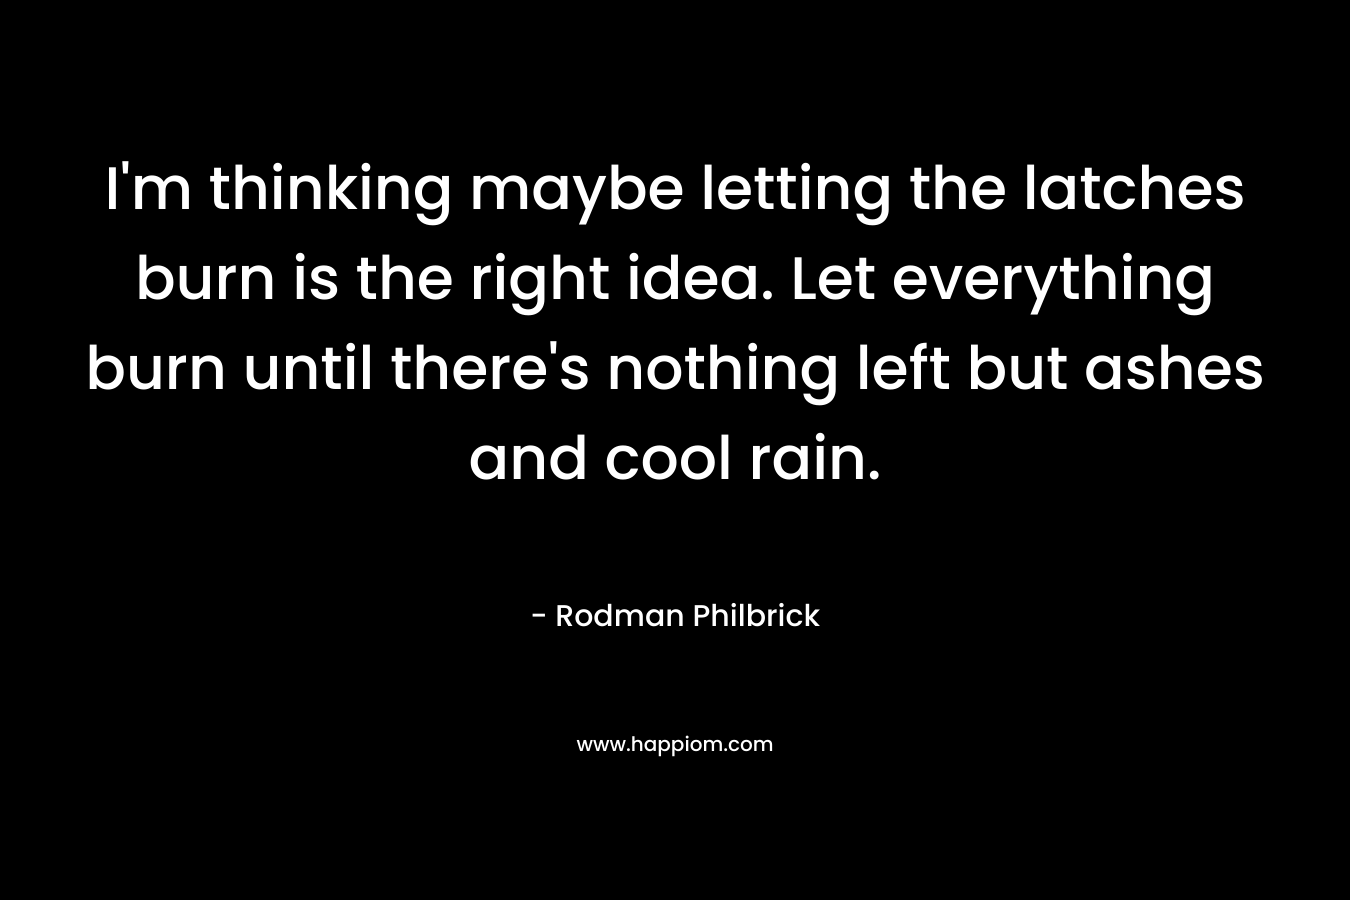 I’m thinking maybe letting the latches burn is the right idea. Let everything burn until there’s nothing left but ashes and cool rain. – Rodman Philbrick